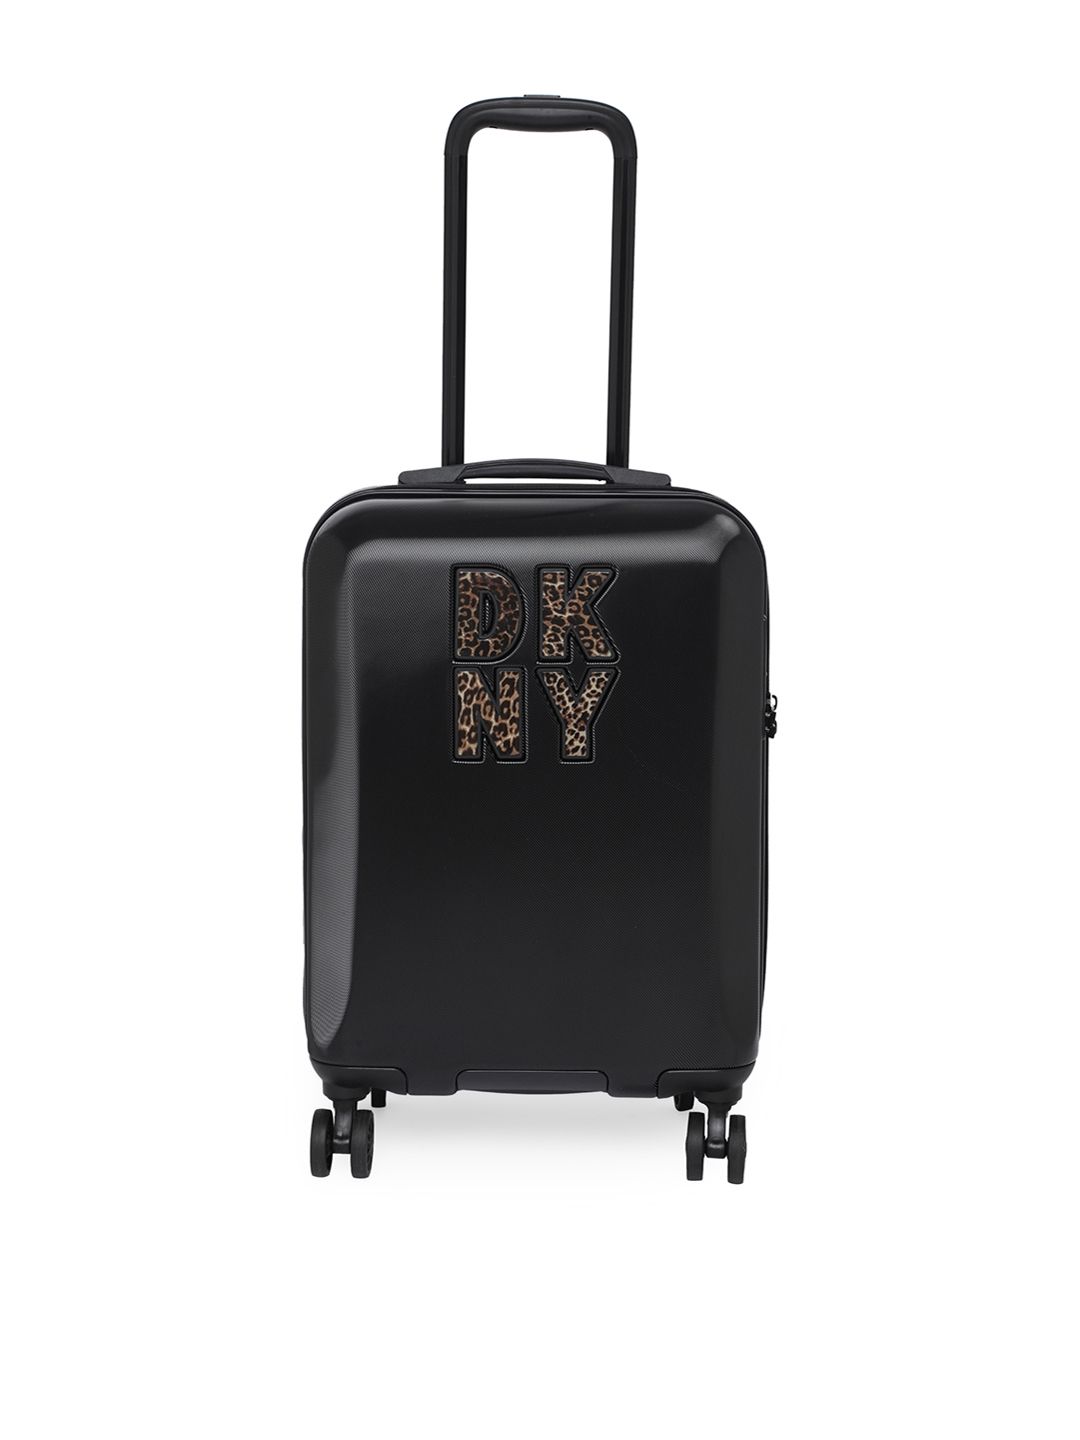 DKNY Black Textured Hard-Sided Cabin Trolley Suitcase Price in India